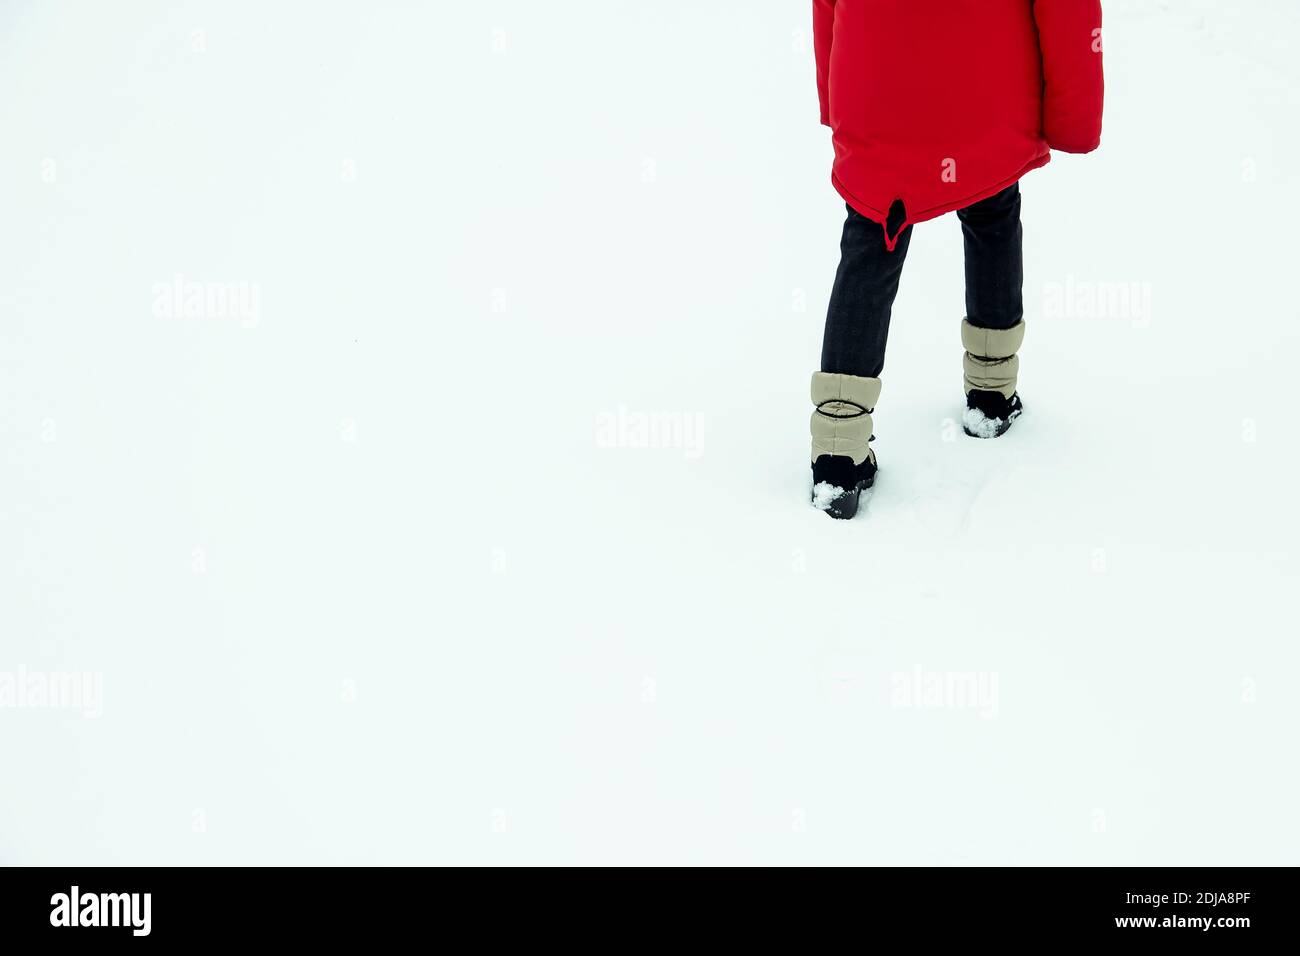 a child walking away in the snow in a red jacket rear view. Stock Photo